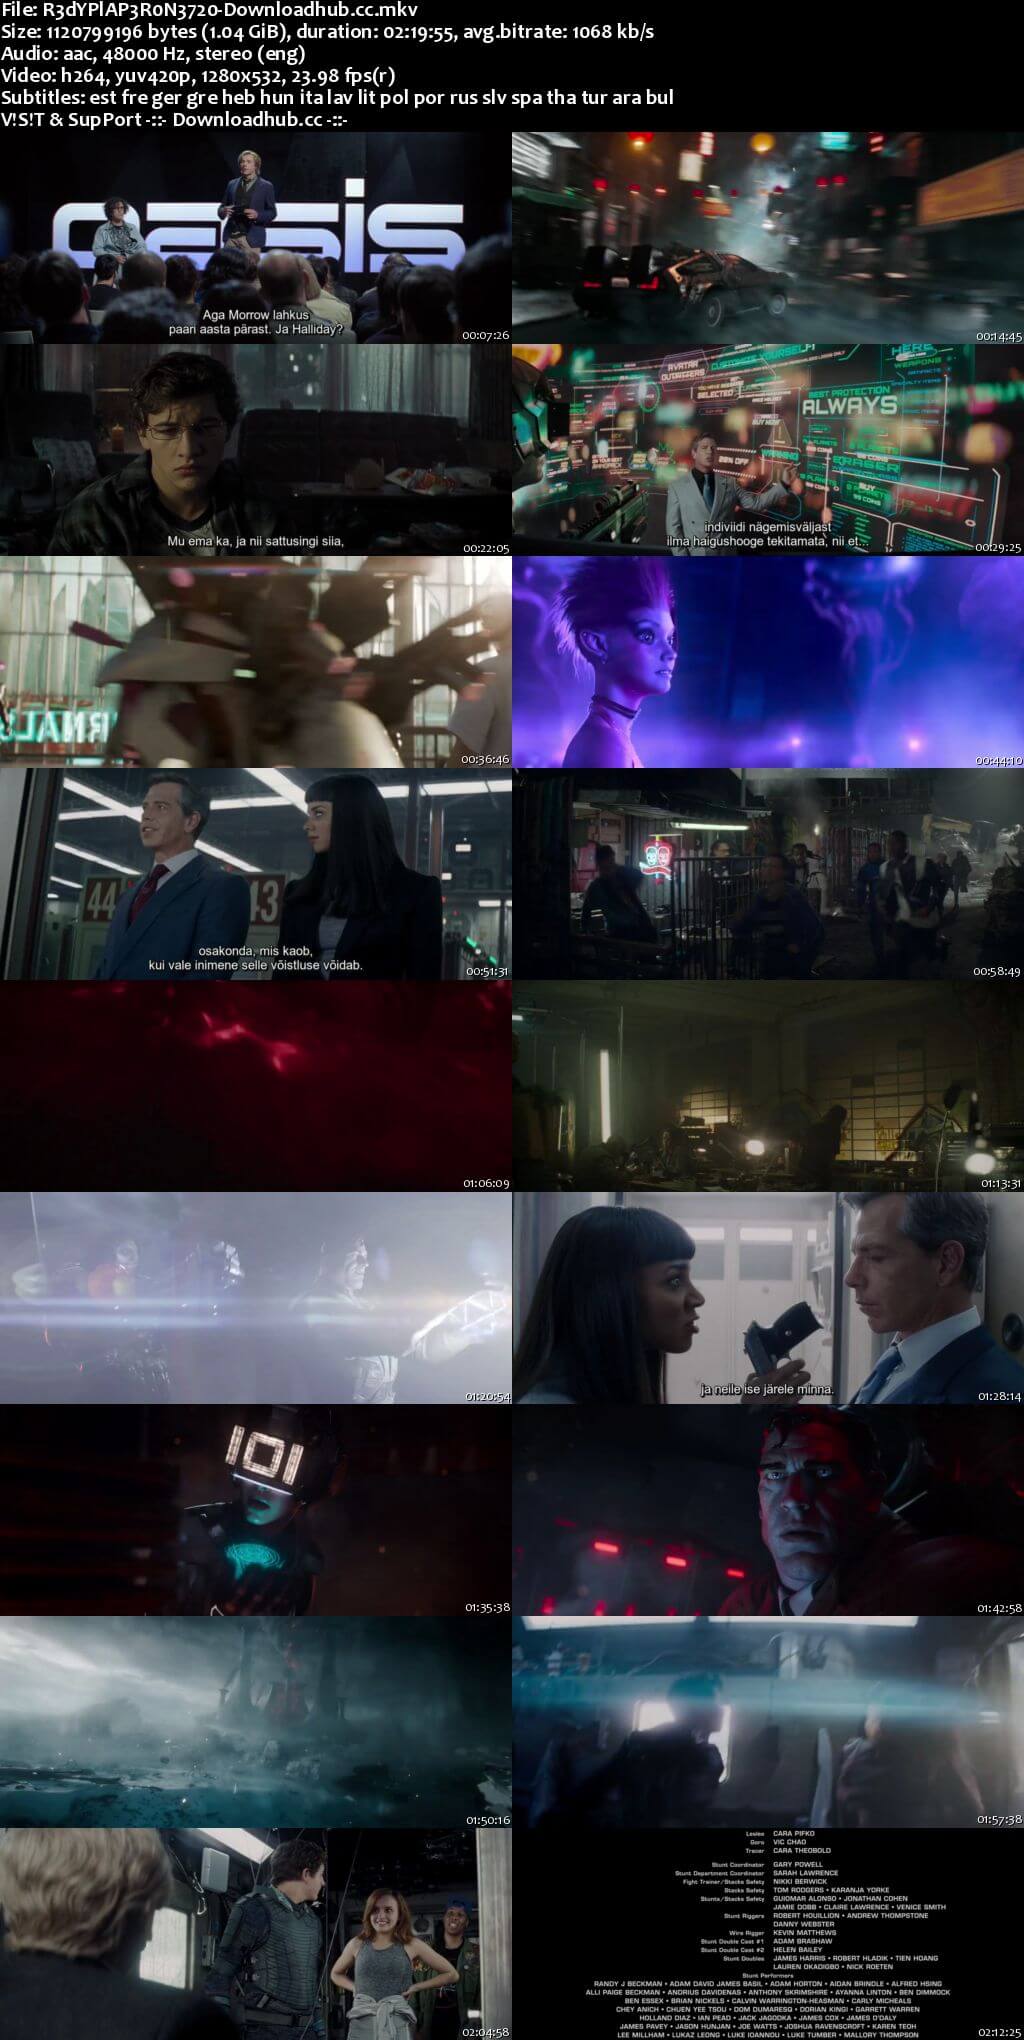 Ready Player One 2018 English 720p WEBRip 1GB MSubs